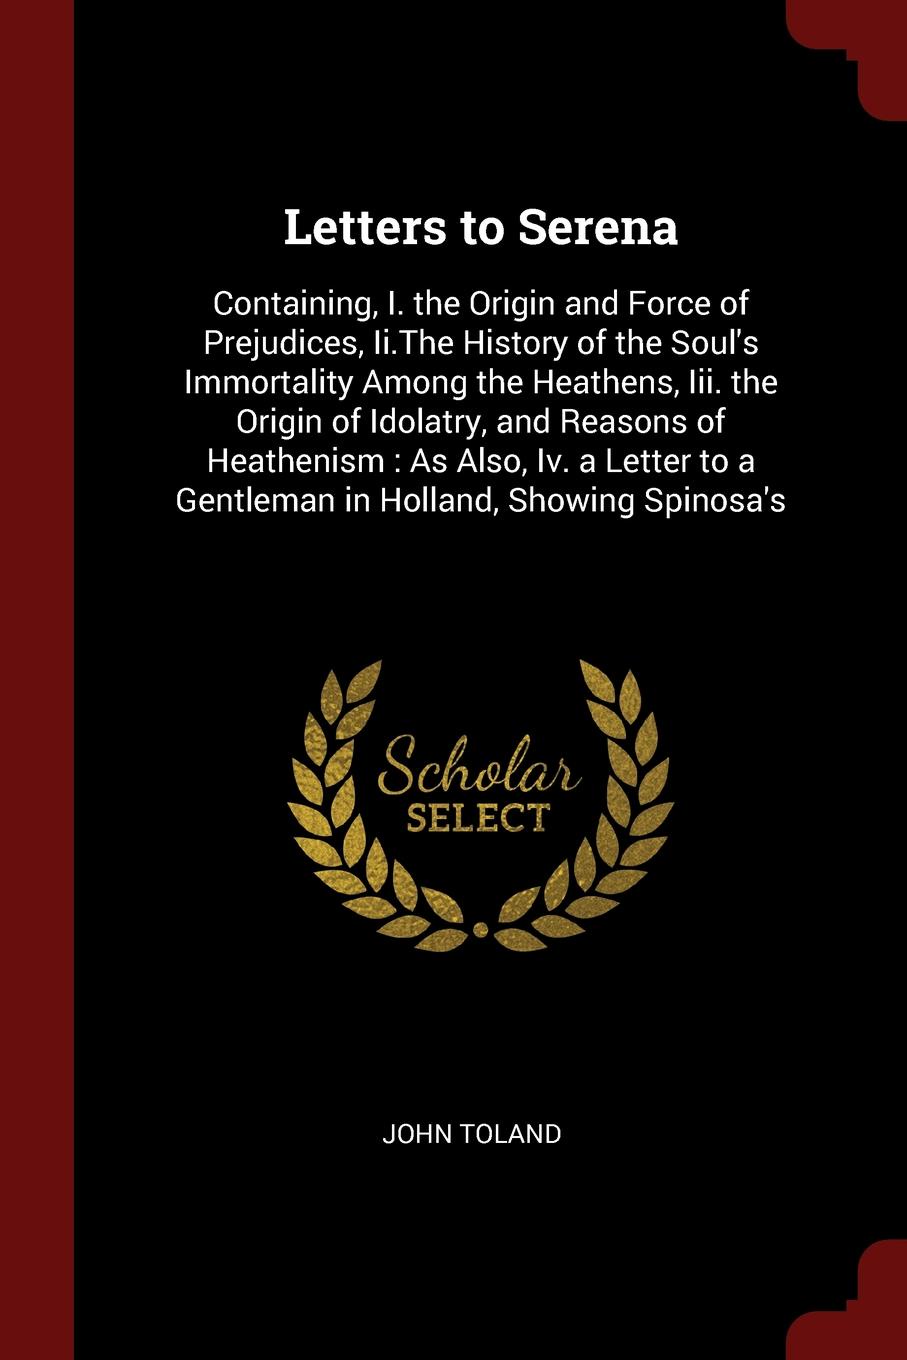 Letters to Serena. Containing, I. the Origin and Force of Prejudices, Ii.The History of the Soul`s Immortality Among the Heathens, Iii. the Origin of Idolatry, and Reasons of Heathenism : As Also, Iv. a Letter to a Gentleman in Holland, Showing Sp...